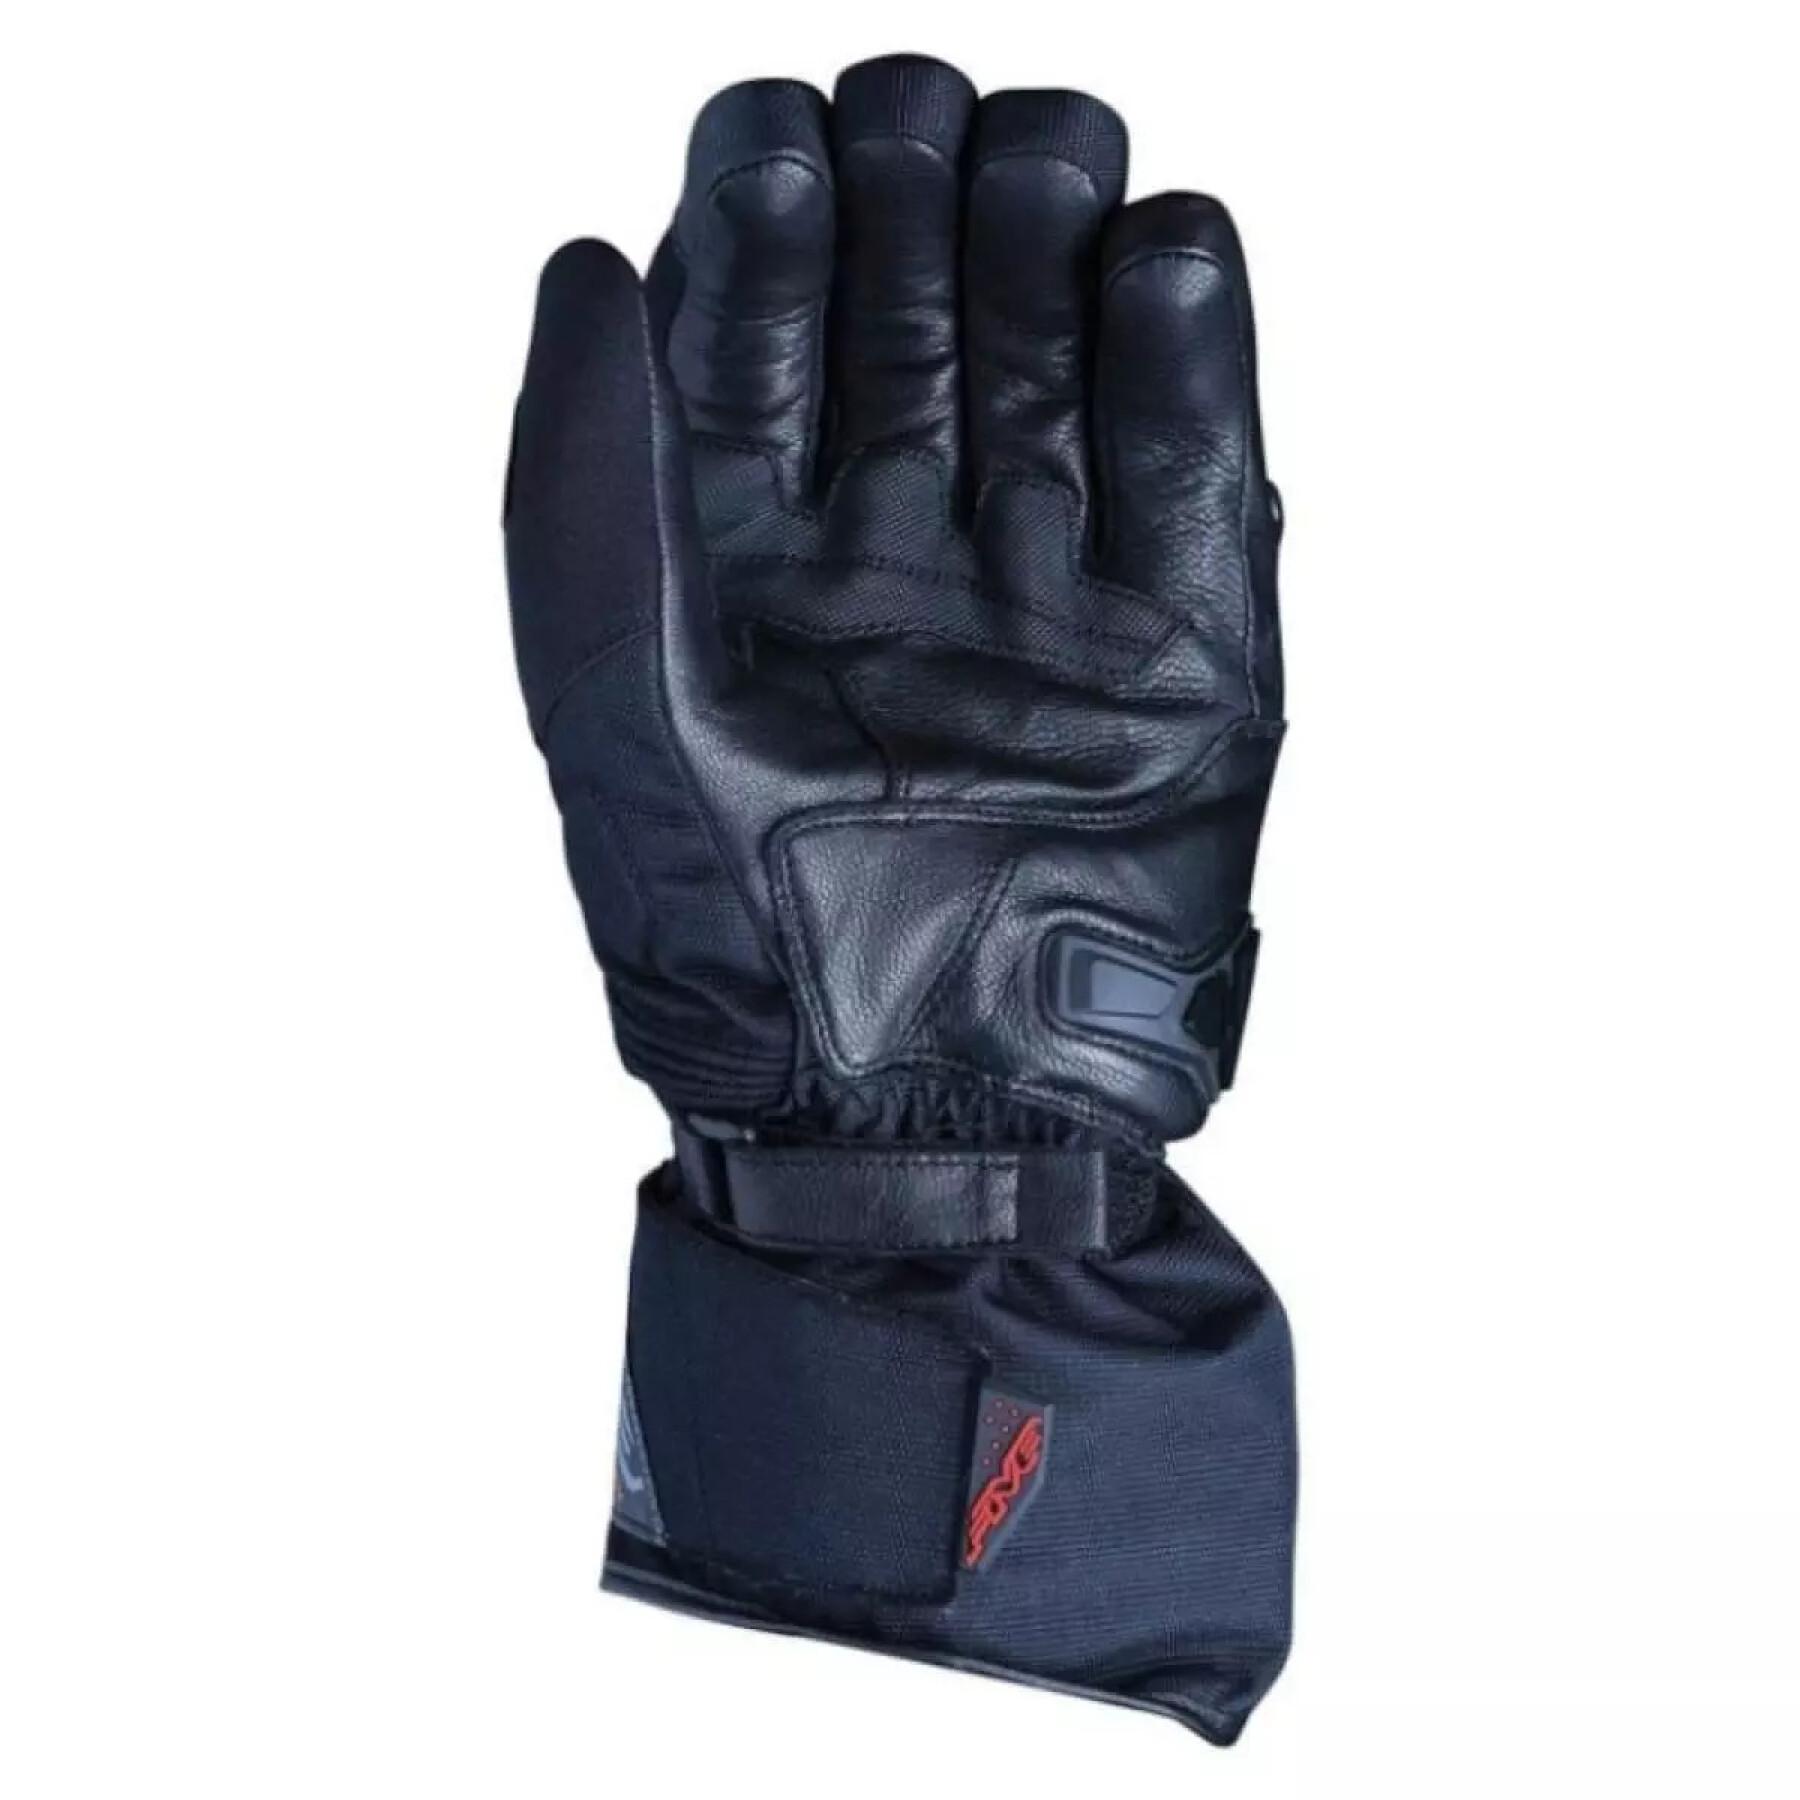 Heated motorcycle gloves Five HG2 Evo Wp